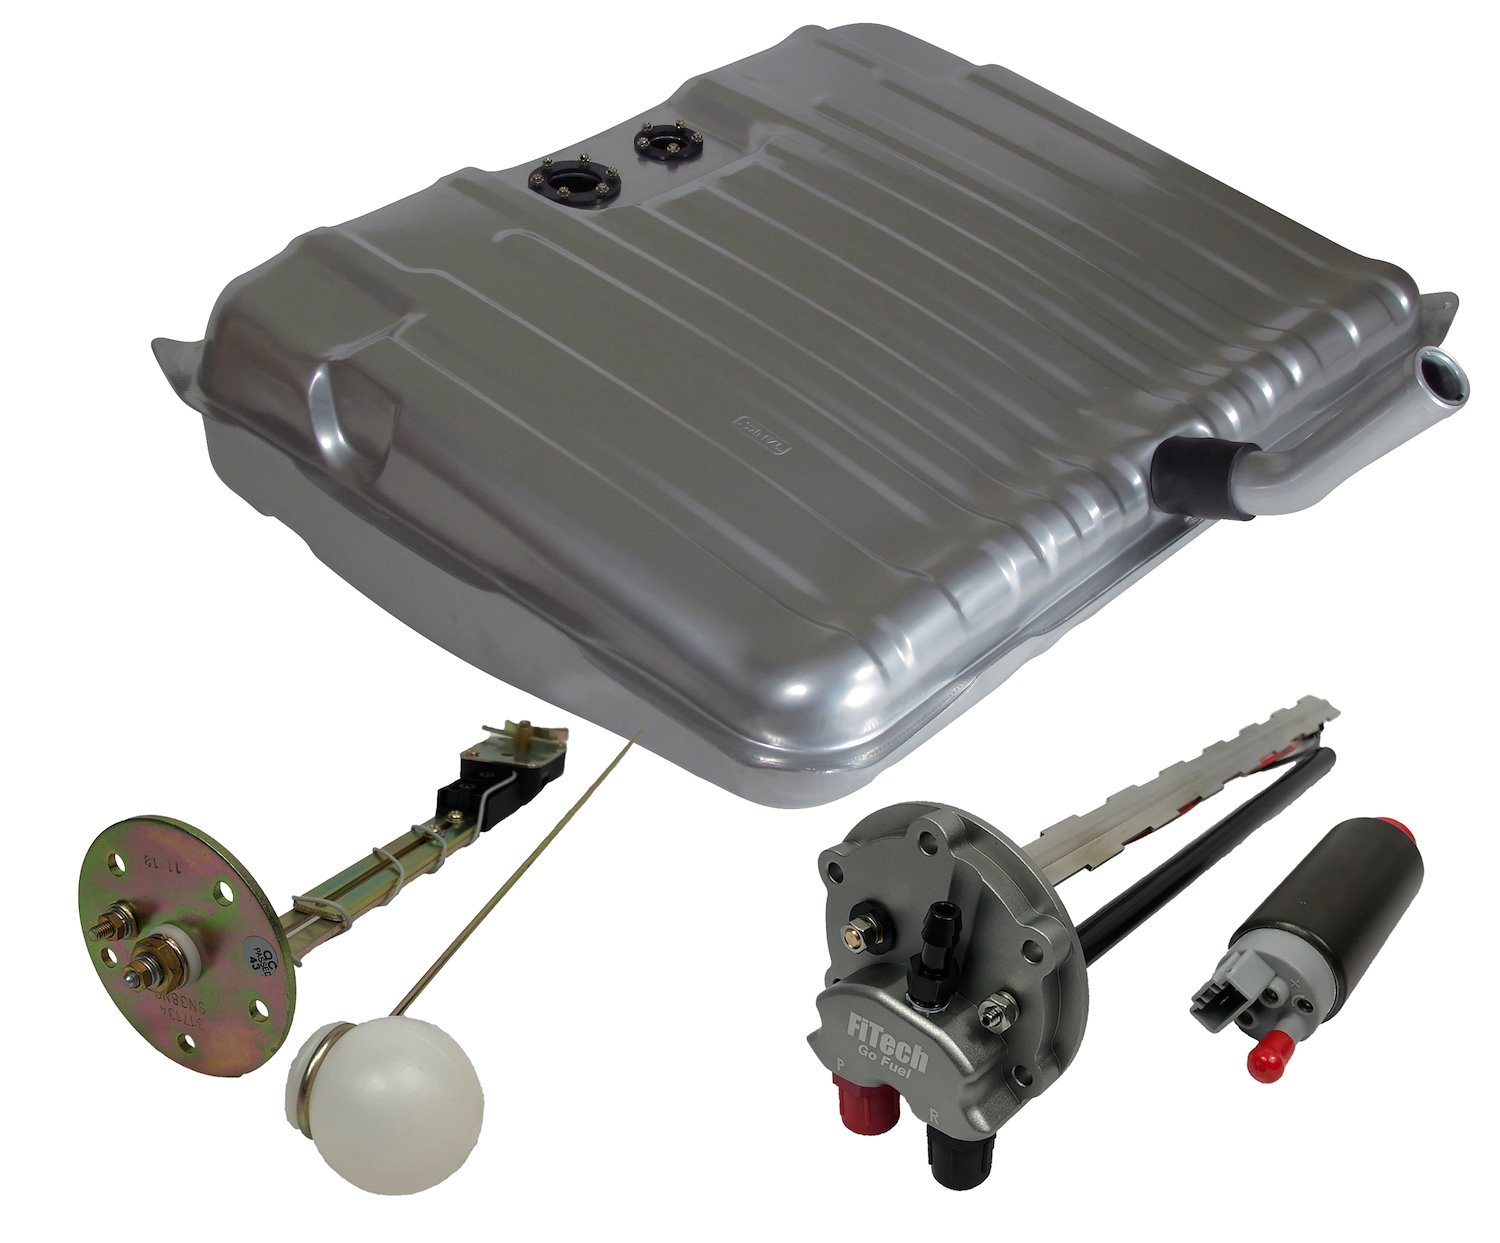 Fuel Tank Kit for Pontiac GTO, Lemans, and Tempest